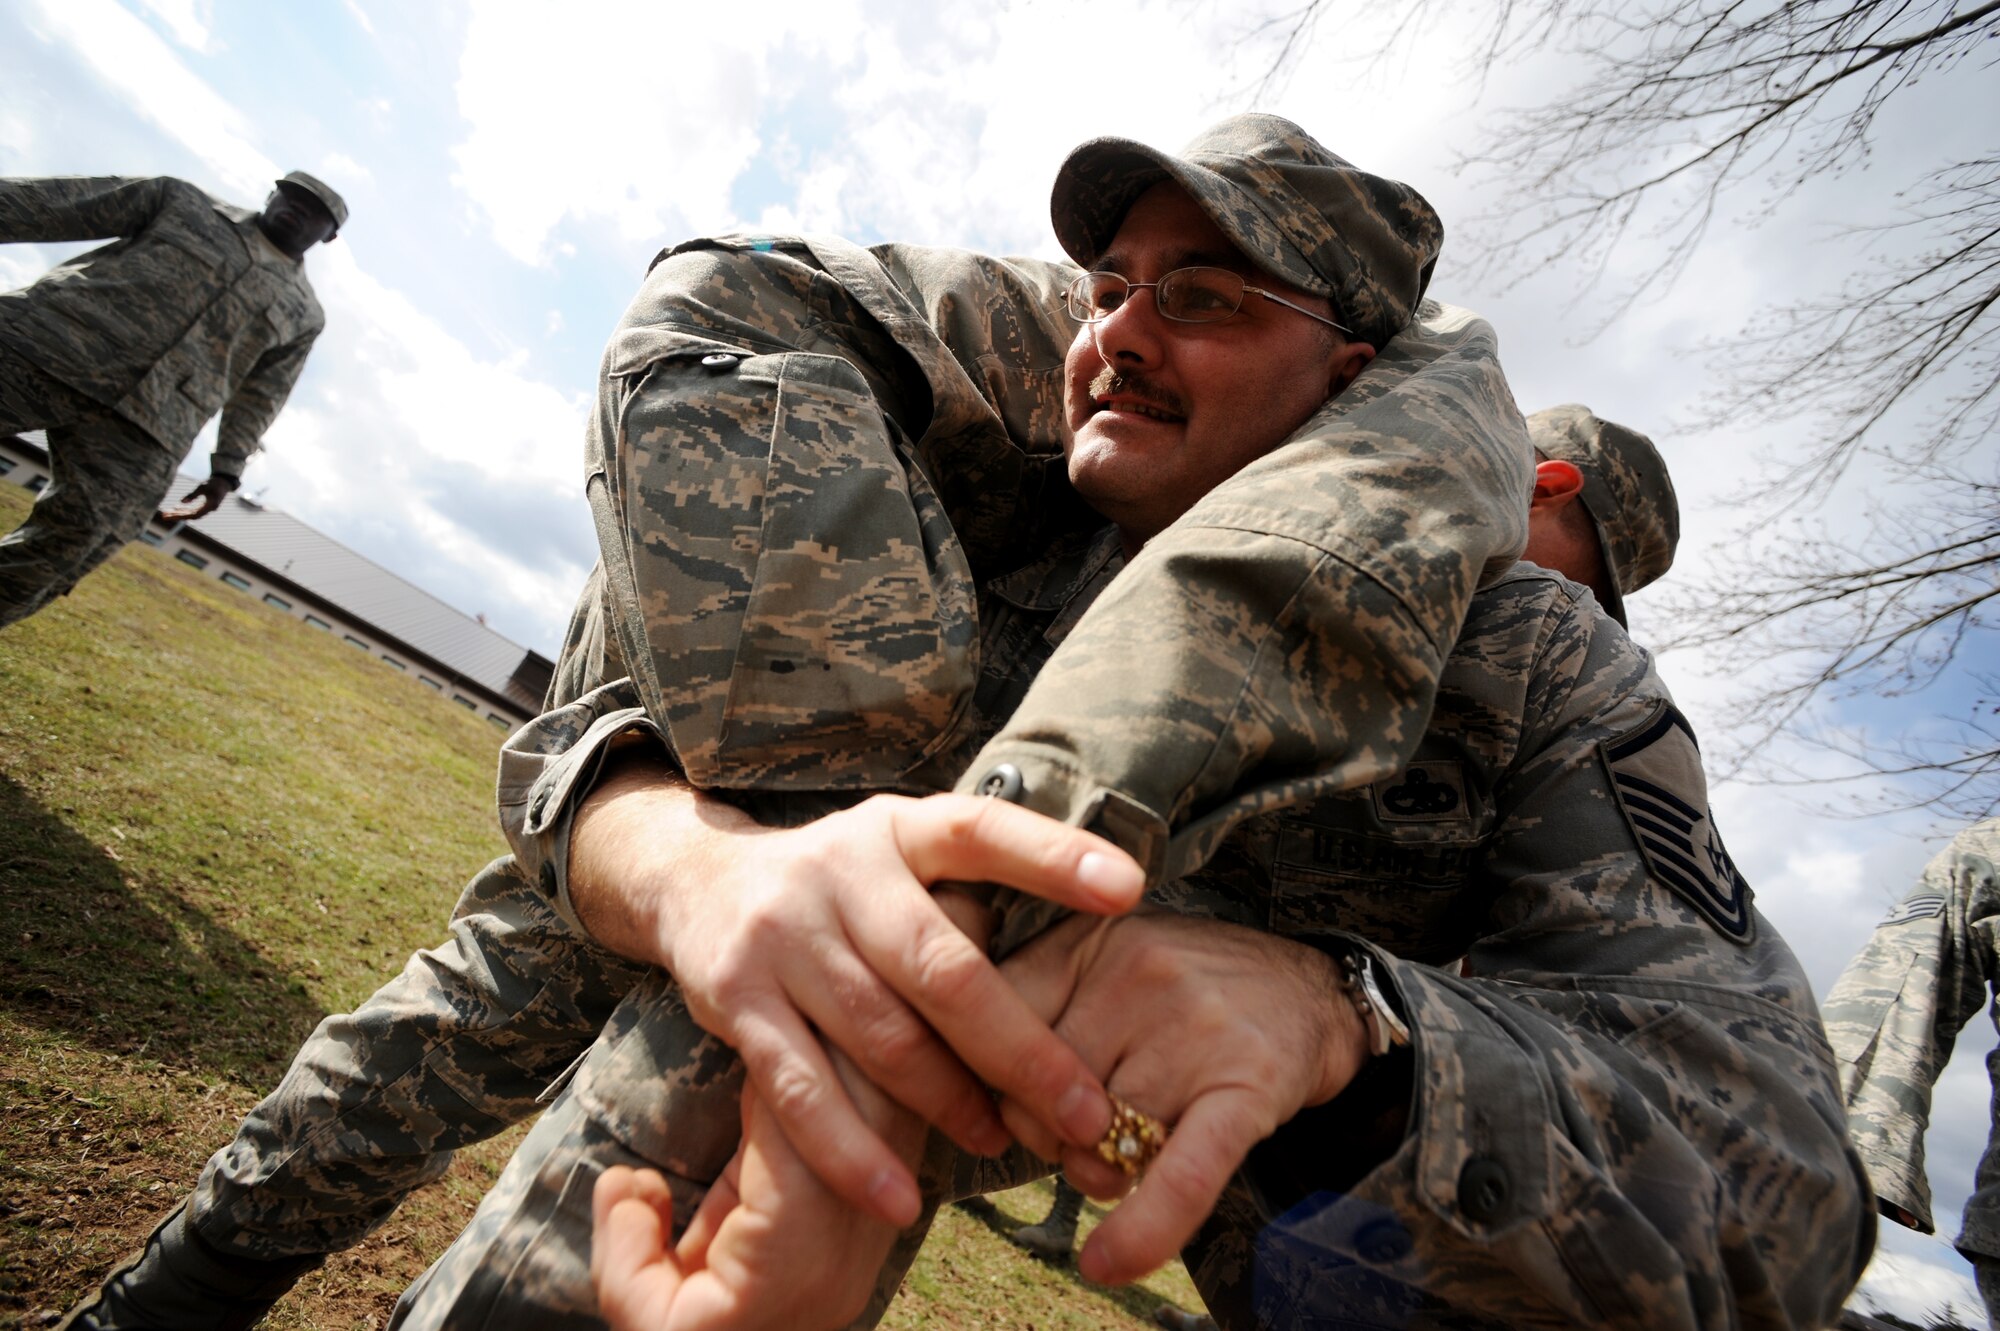 U.S. Air Force Master Sgt. David Mercer, 86th Airlift Wing Staff Agency, unit deployment manager, practices a fireman's carry during self aid and buddy care training in support of the upcoming Operations Readiness Inspection (ORI), April 2, 2010, Ramstein Air Base, Germany. Preparation for the ORI allows Air Force members to build on strengths and indentify weaknesses in order to better support future missions. (U.S. Air Force photo by Tech. Sgt. Sarayuth Pinthong)